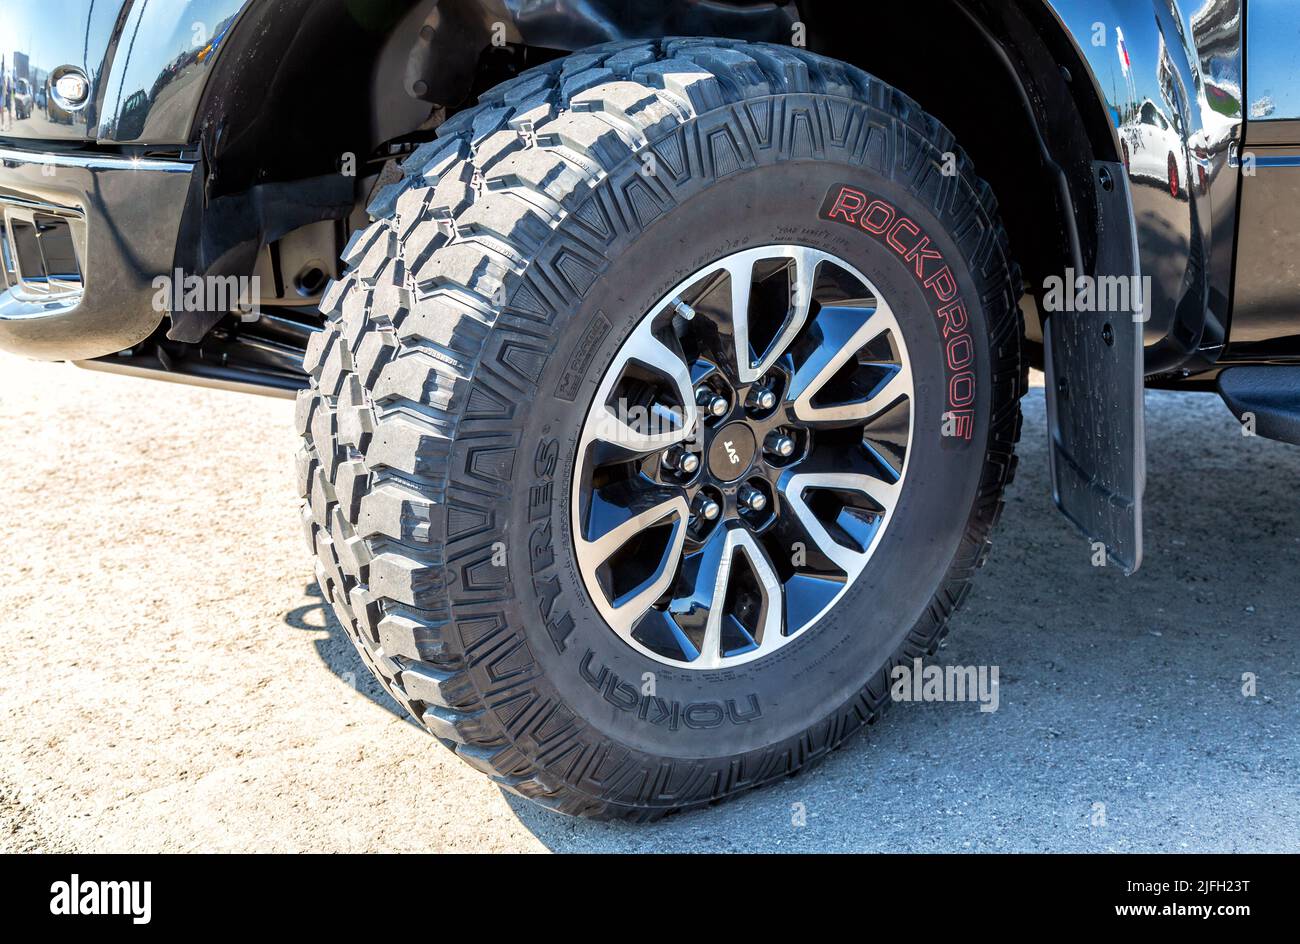 Samara, Russia - June 26, 2022: Offroad car wheel with all terrain tyres Nokian Tyres Stock Photo